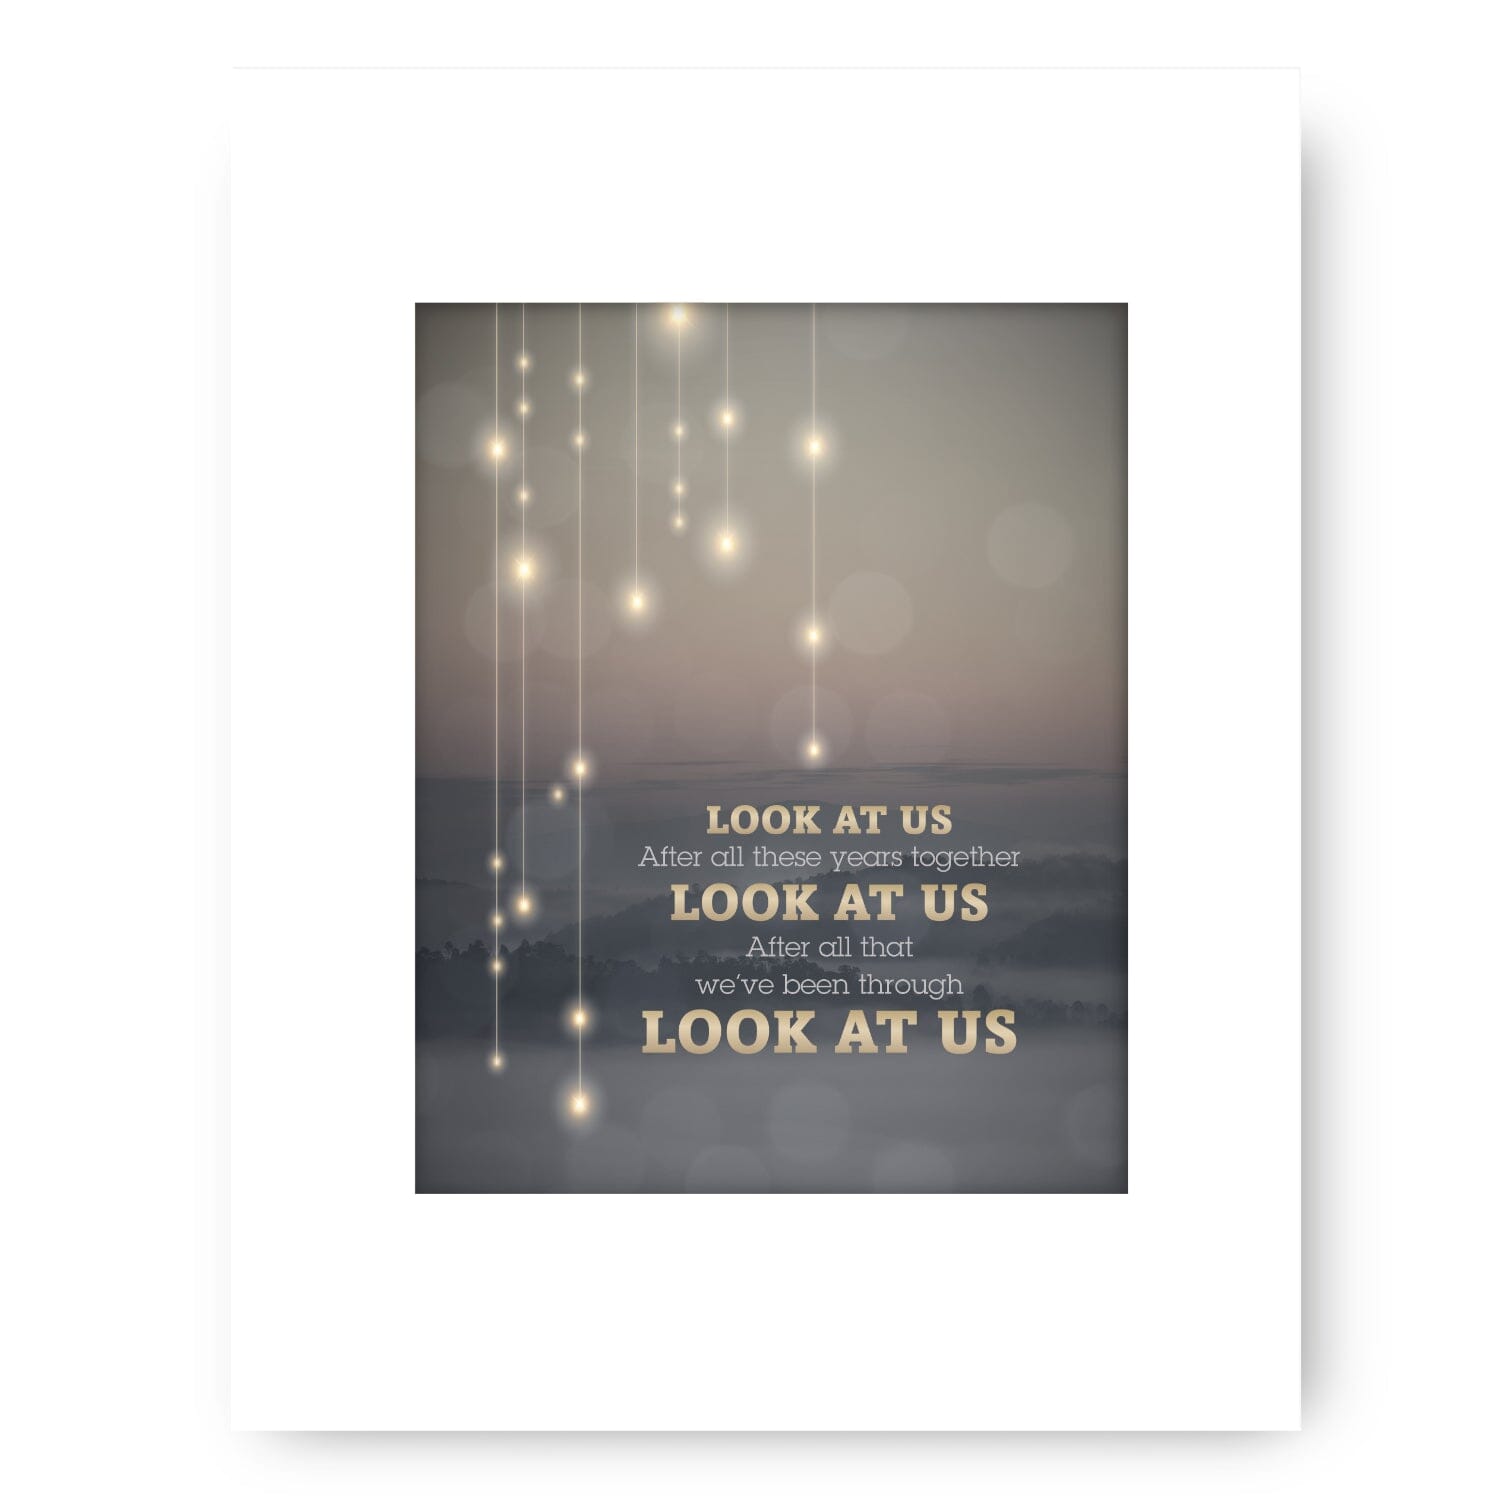 Look at Us by Vince Gill - Pop Country Song Art Song Lyrics Art Song Lyrics Art 8x10 White Matted Print 